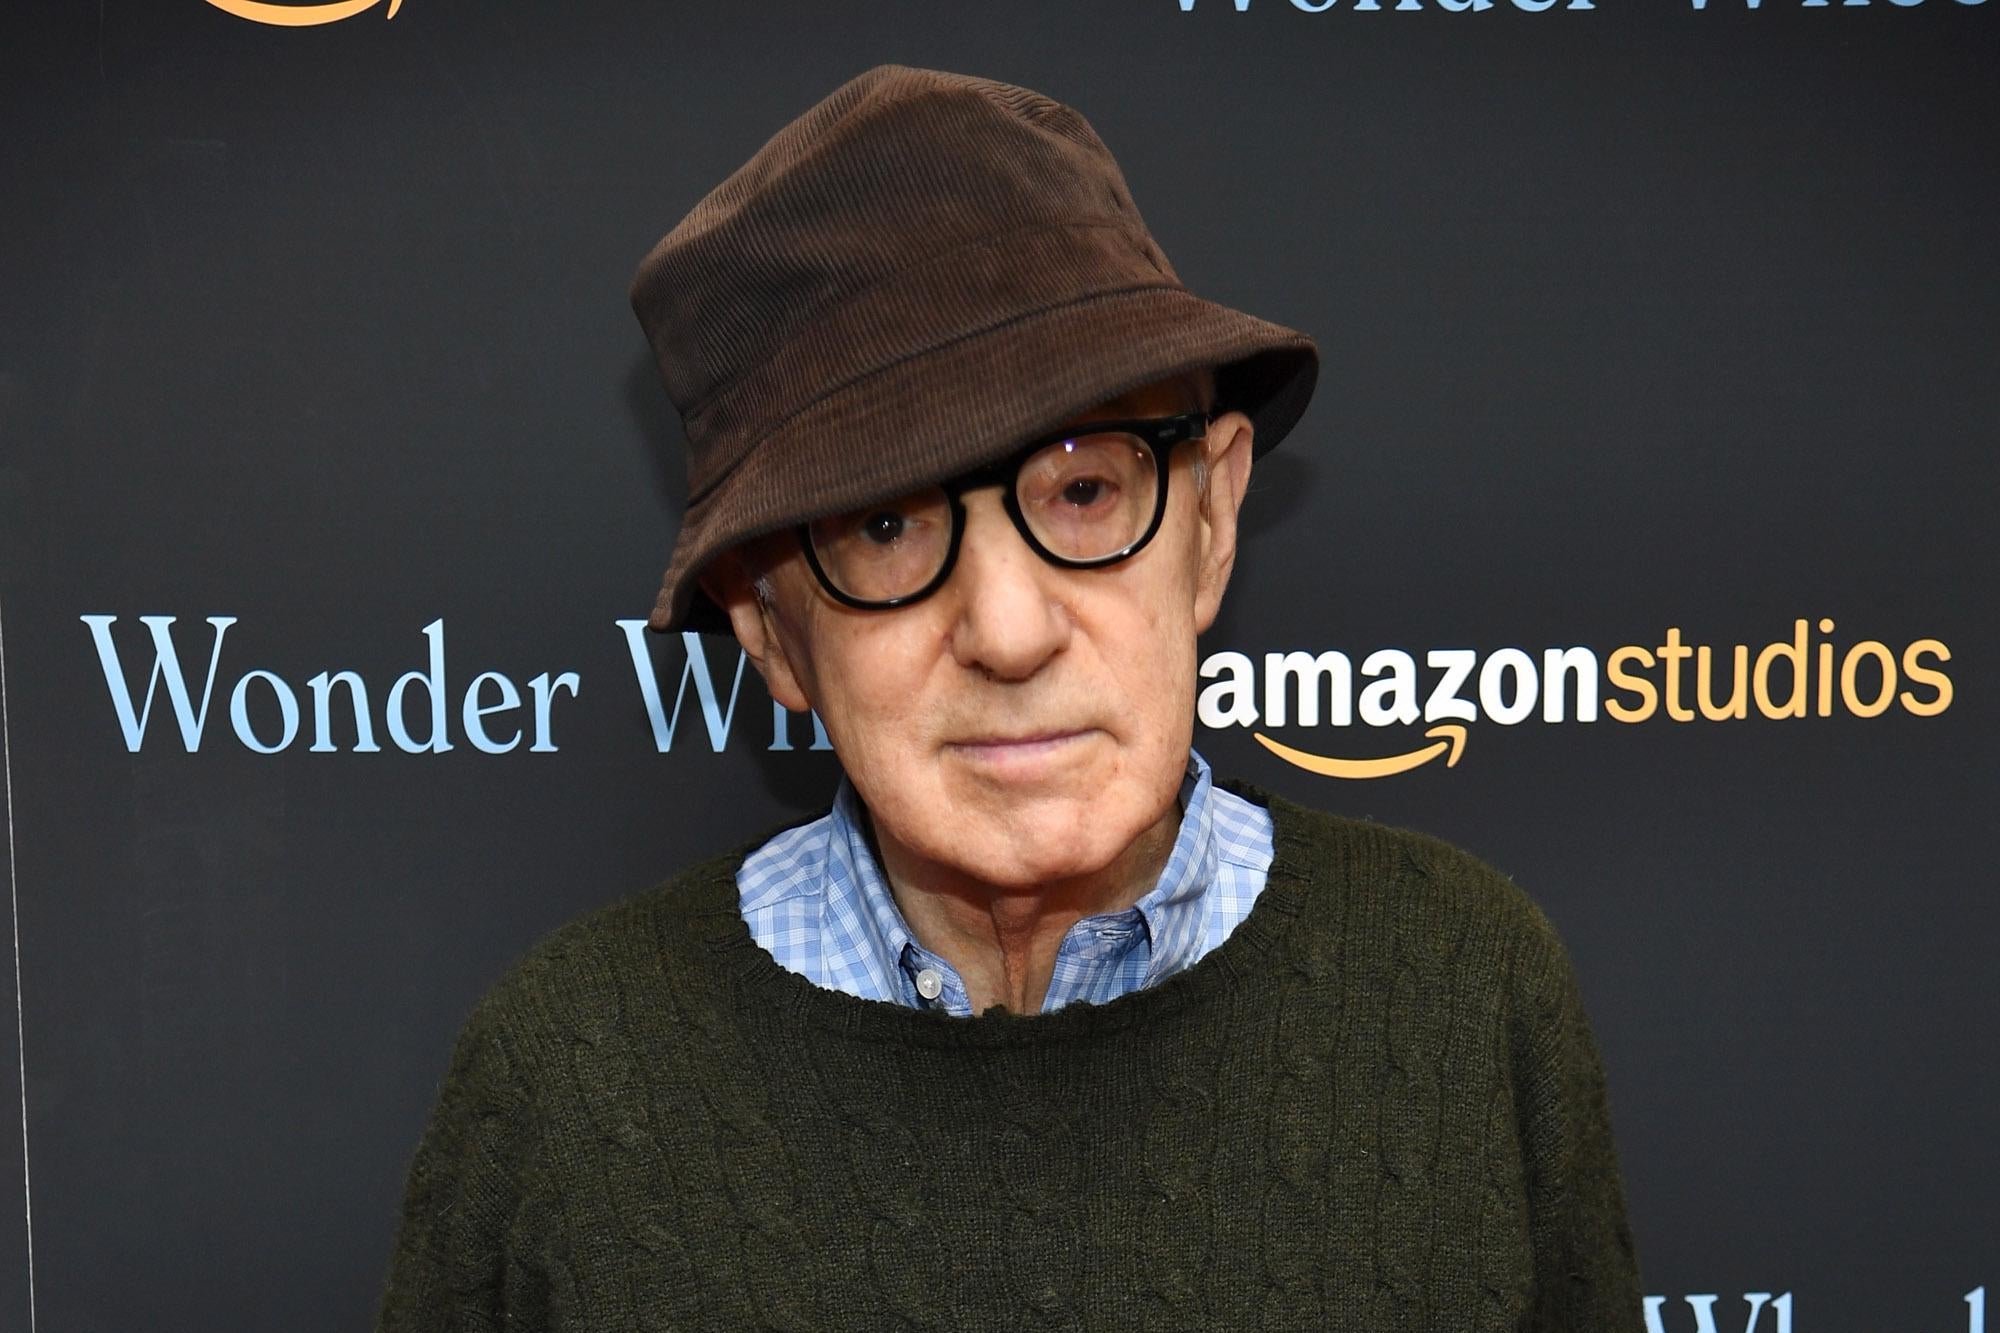 Woody Allen wears a brown bucket hat and black glasses as he poses in front of a backdrop the says "Wonder Wheel" and "Amazon Studios."